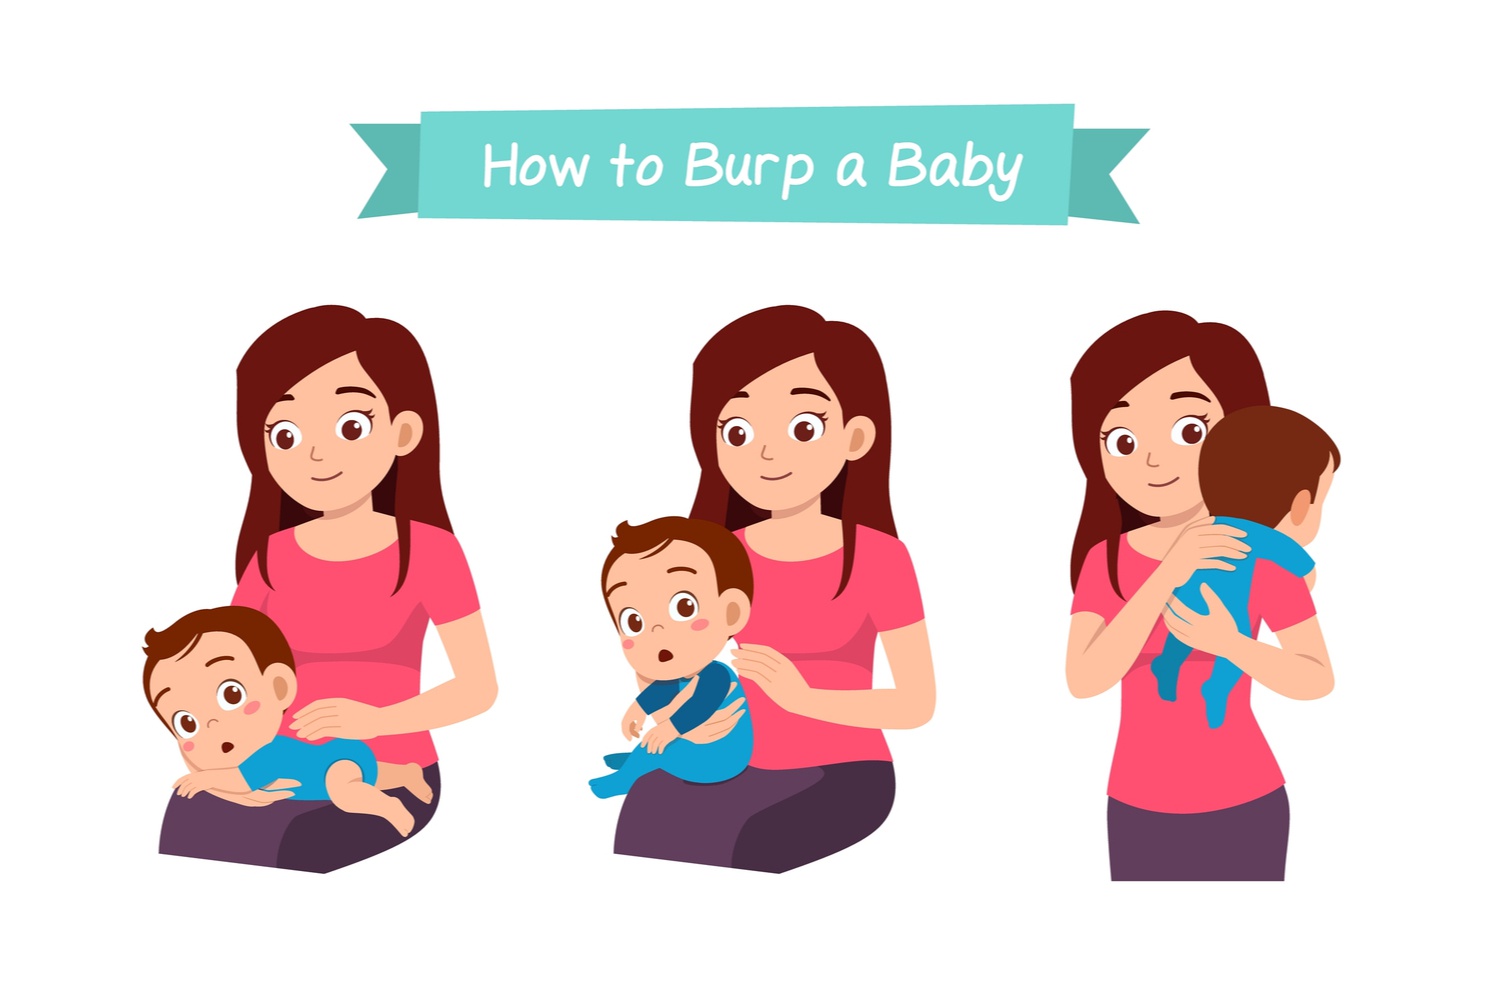 How to burp a baby